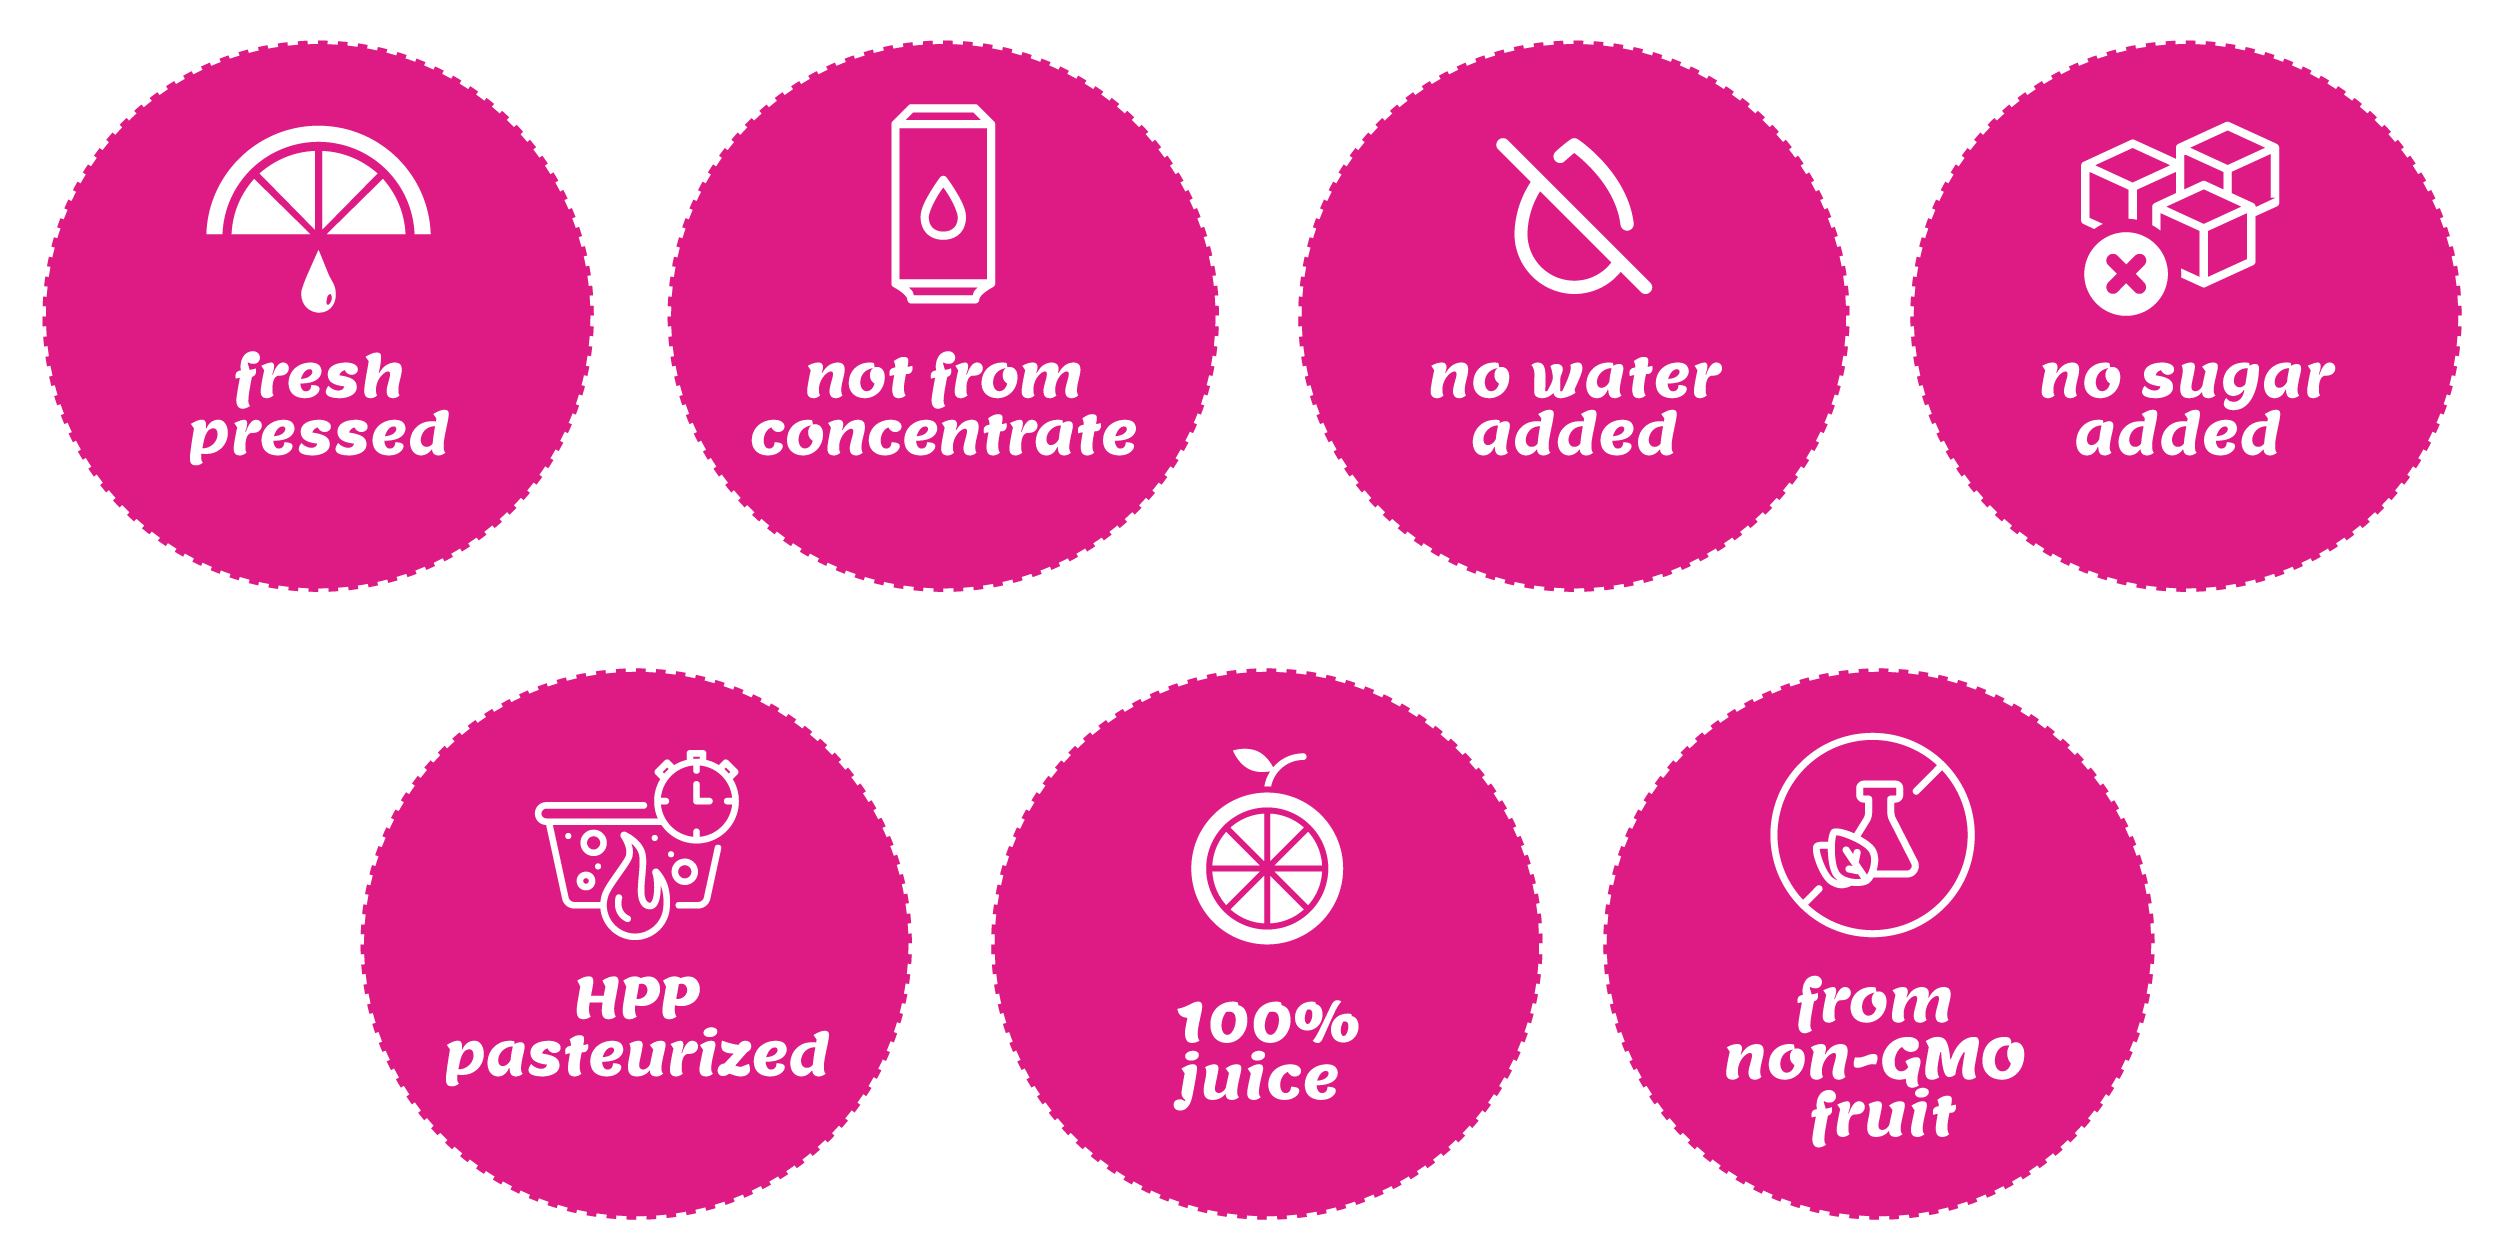 Fresh Pressed • Not From Concentrate • No Water Added • No Sugar Added • HPP Pasteurized • 100% Juice • From Non-GMO Fruit